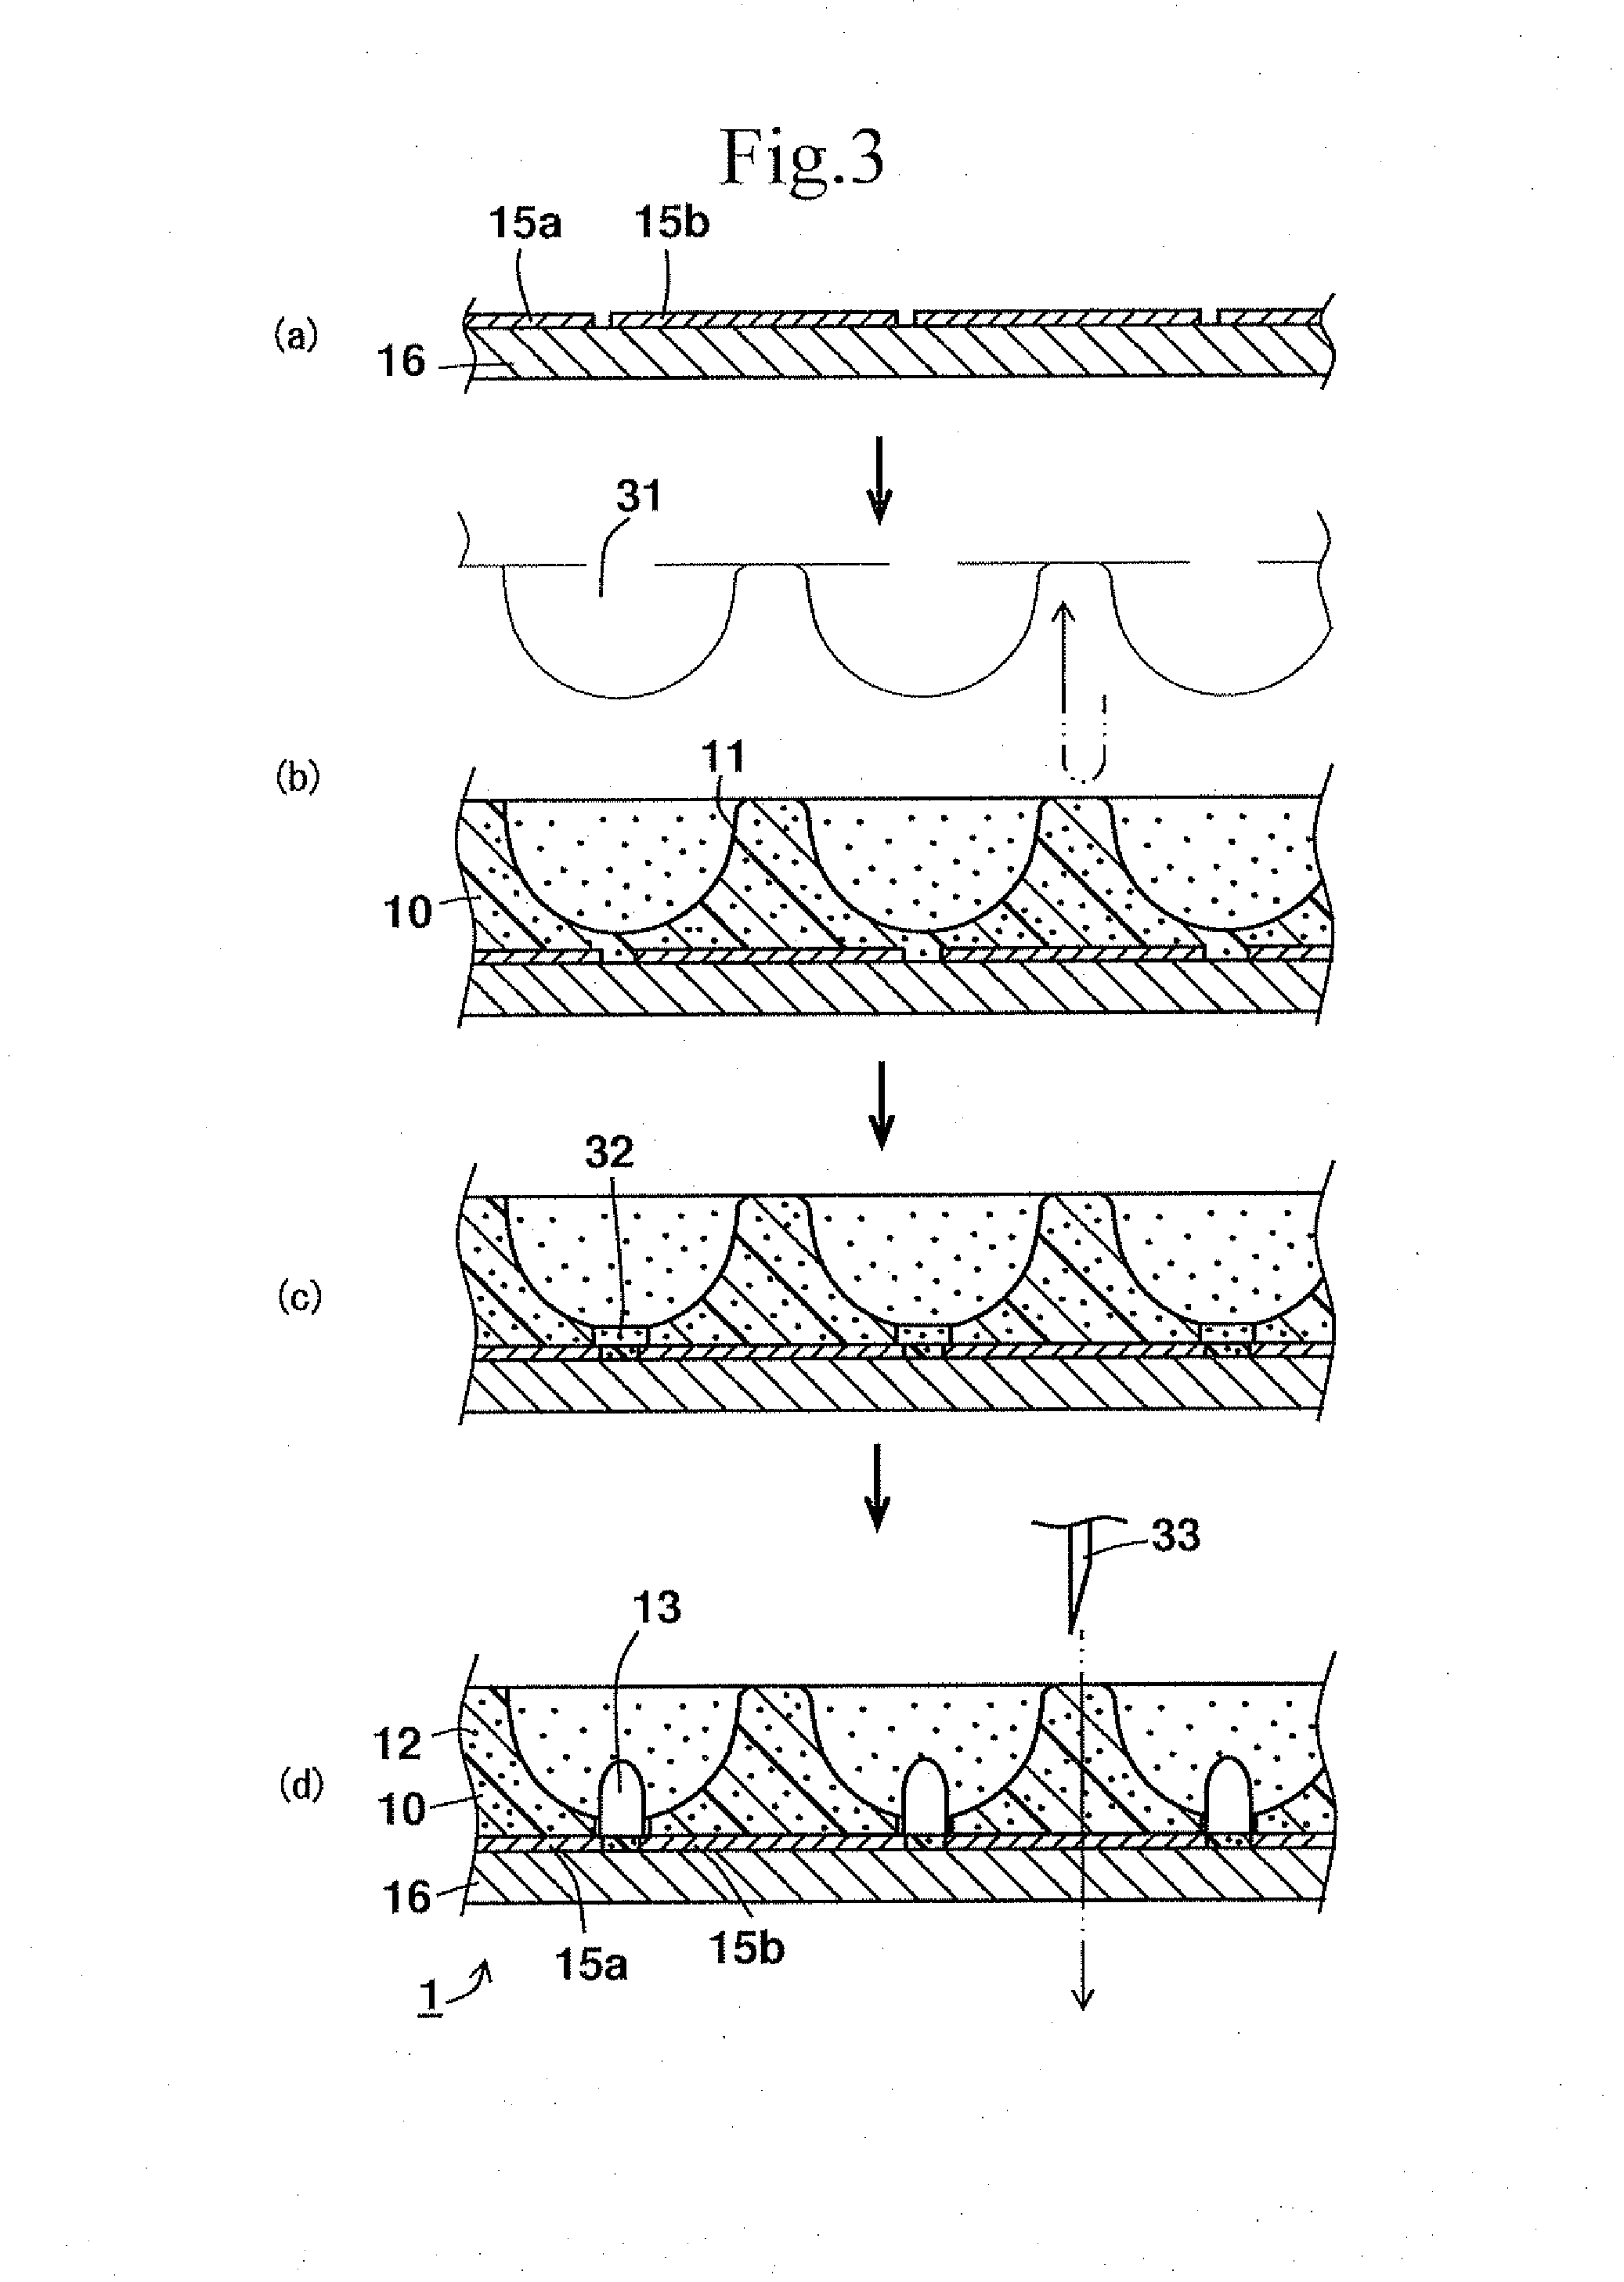 Silicone resin reflective substrate, manufacturing method for same, and base material composition used in reflective substrate